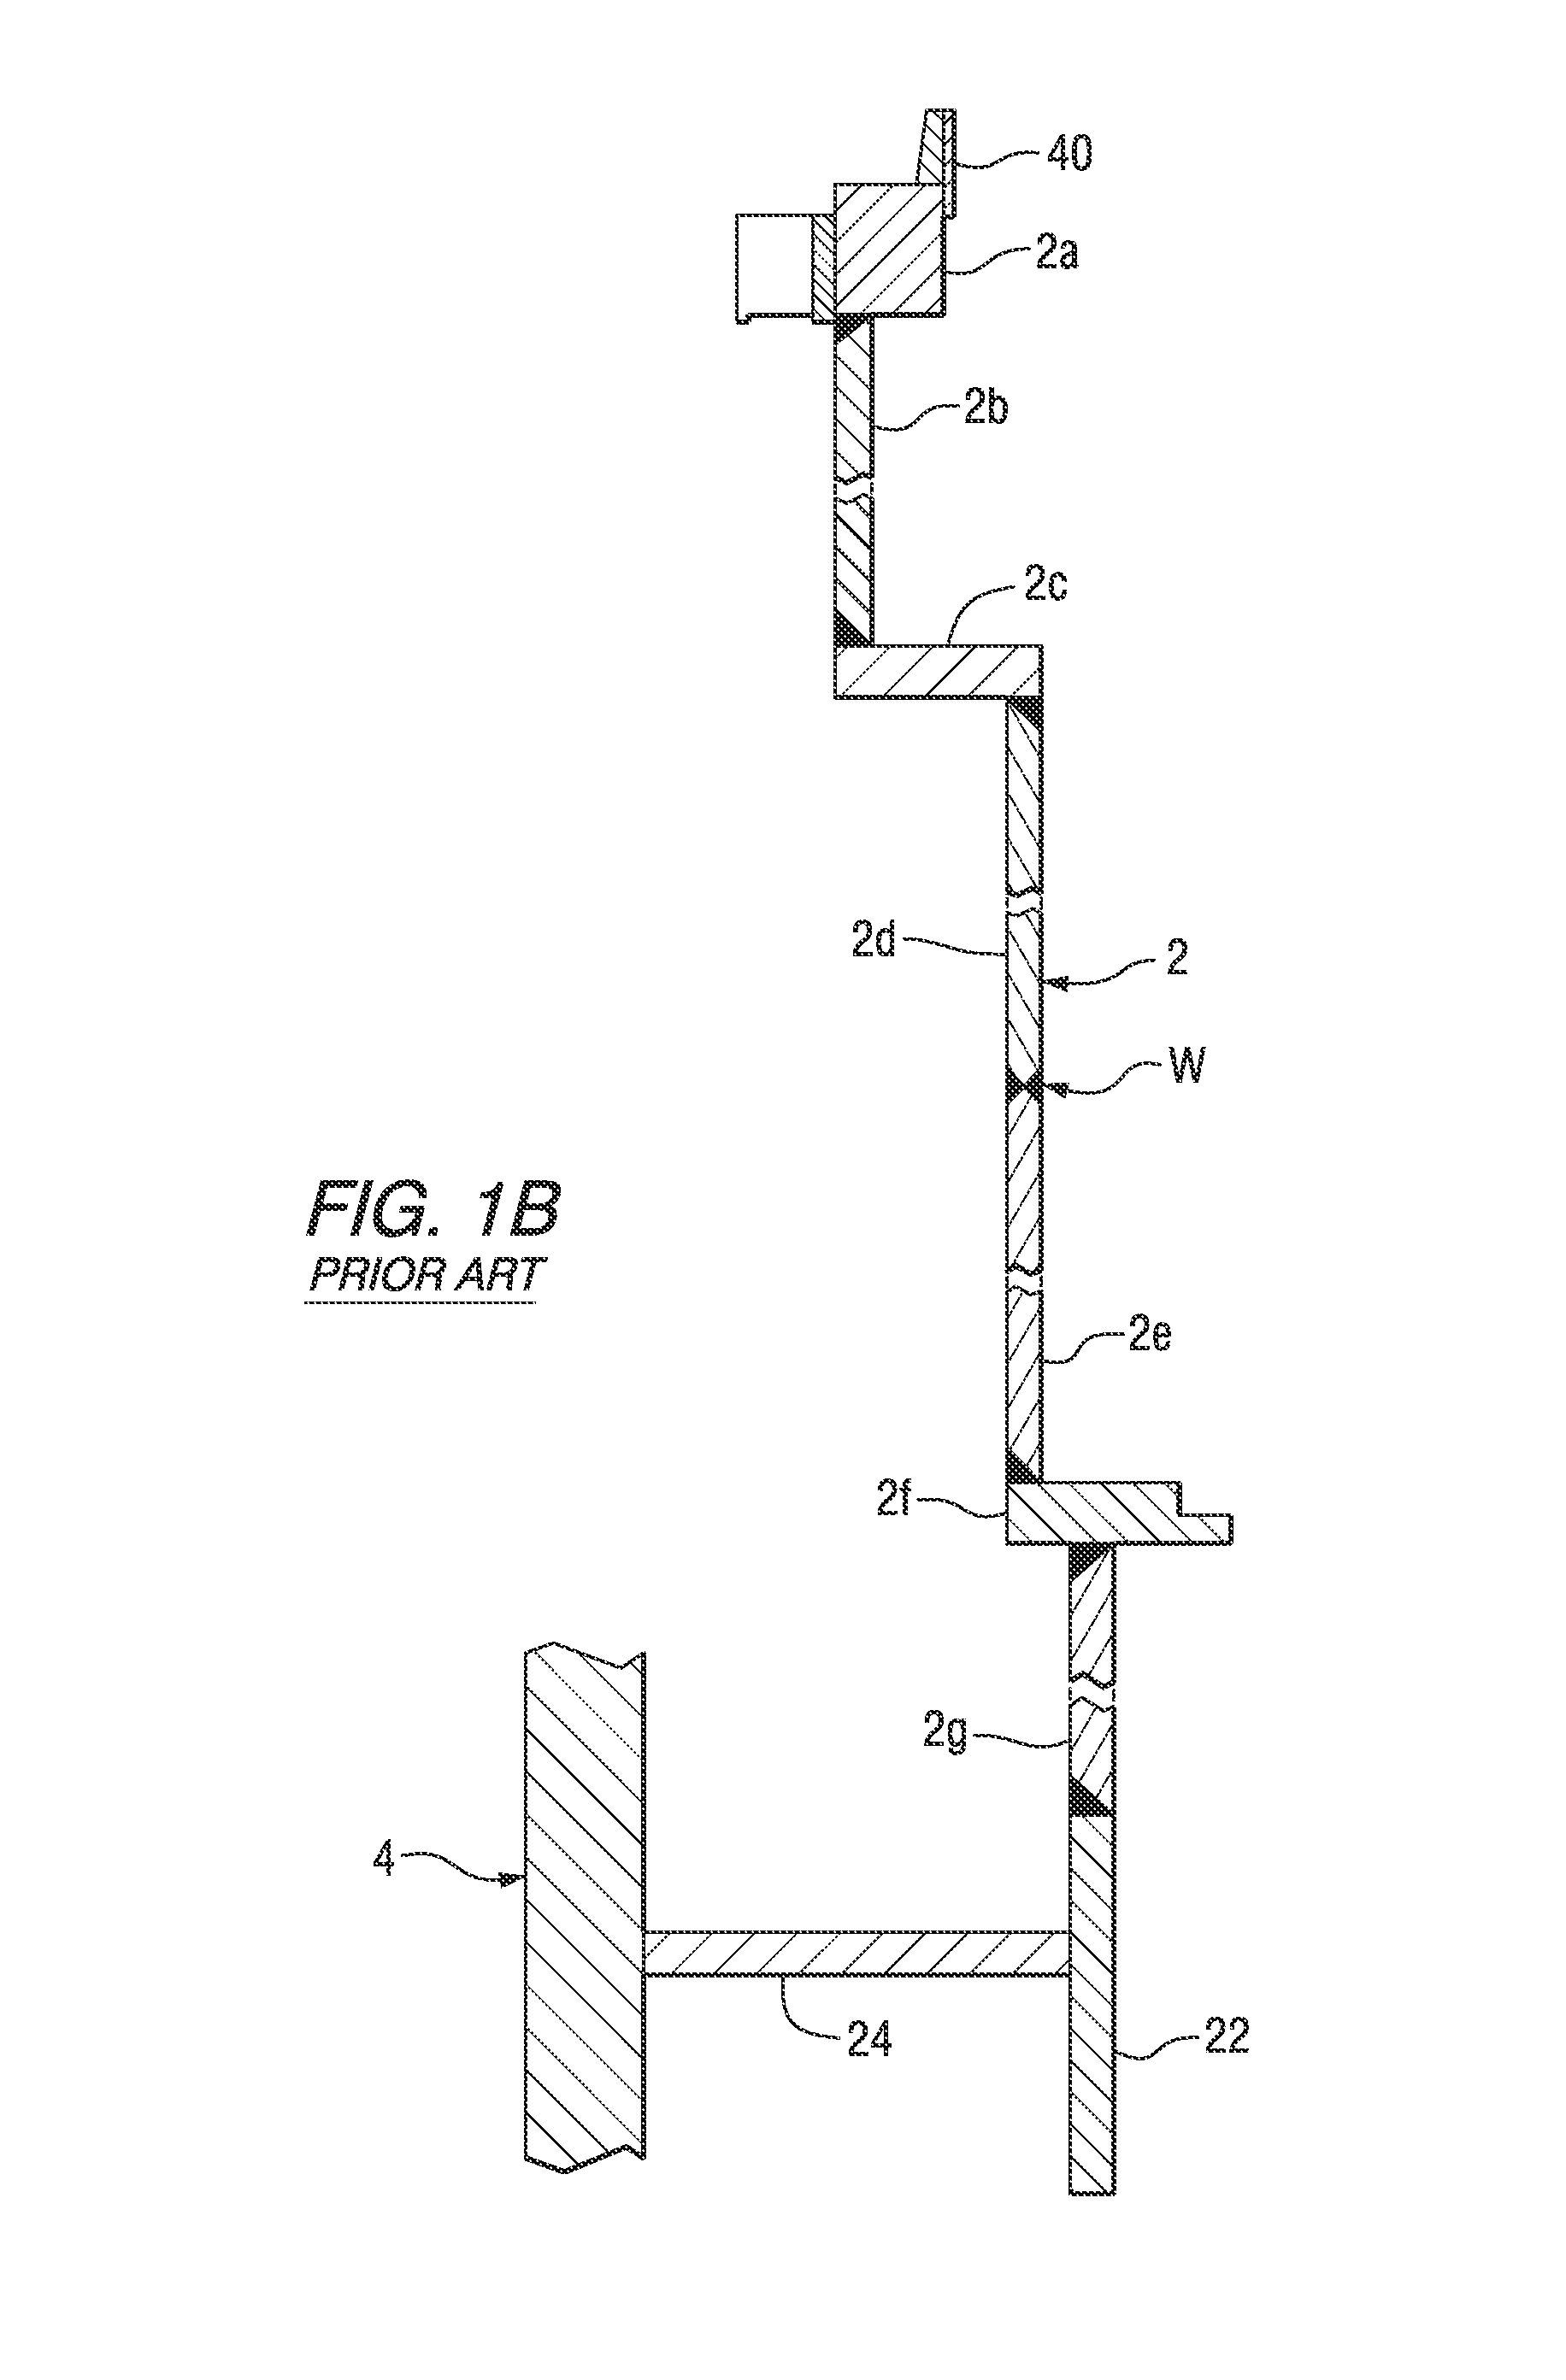 Apparatus and method to inspect, modify, or repair nuclear reactor core shrouds